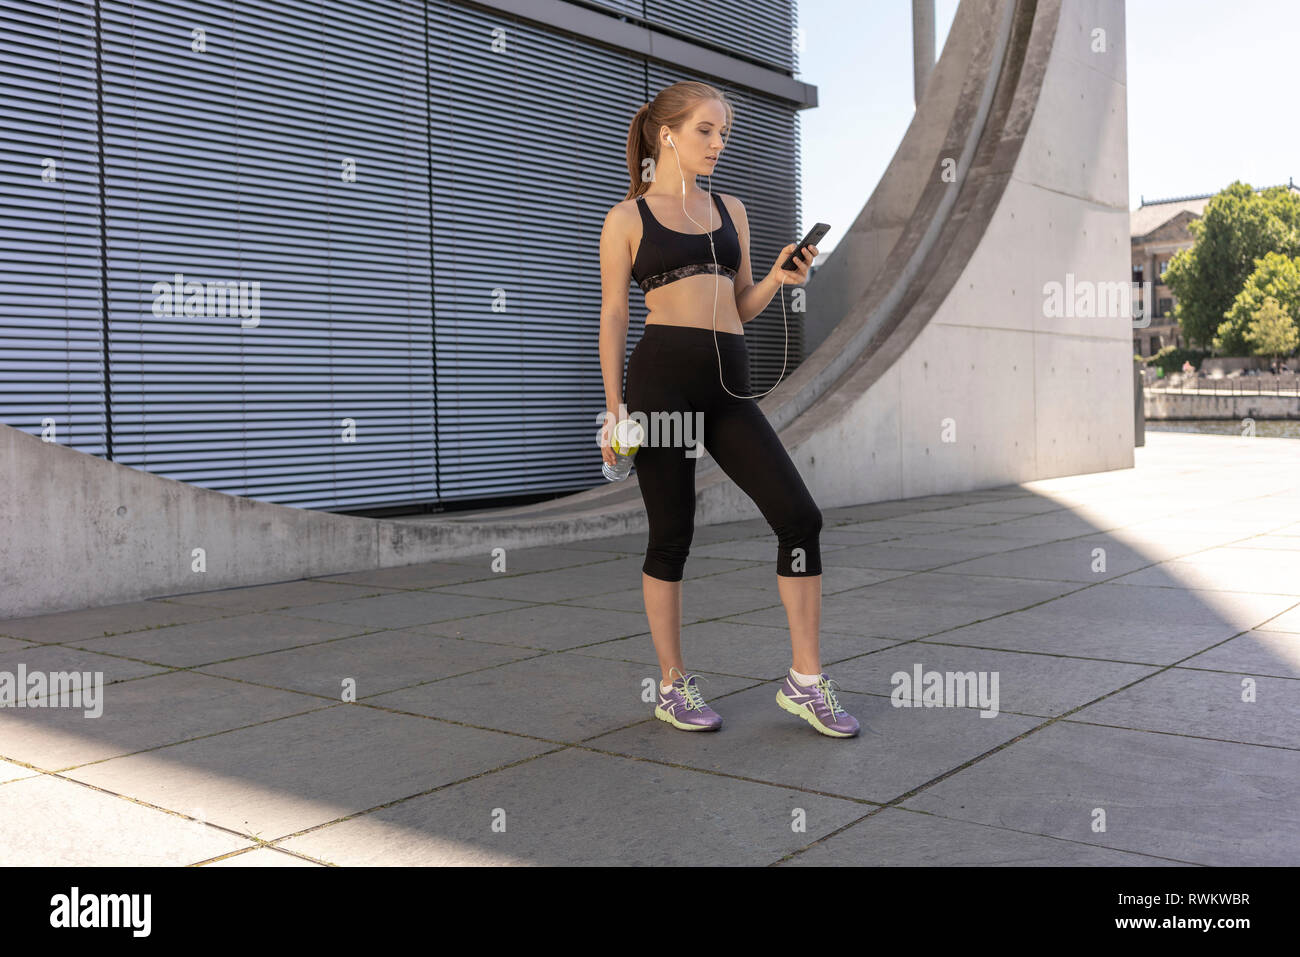 Young woman taking break from exercise and using smartphone in city, Berlin, Germany Stock Photo